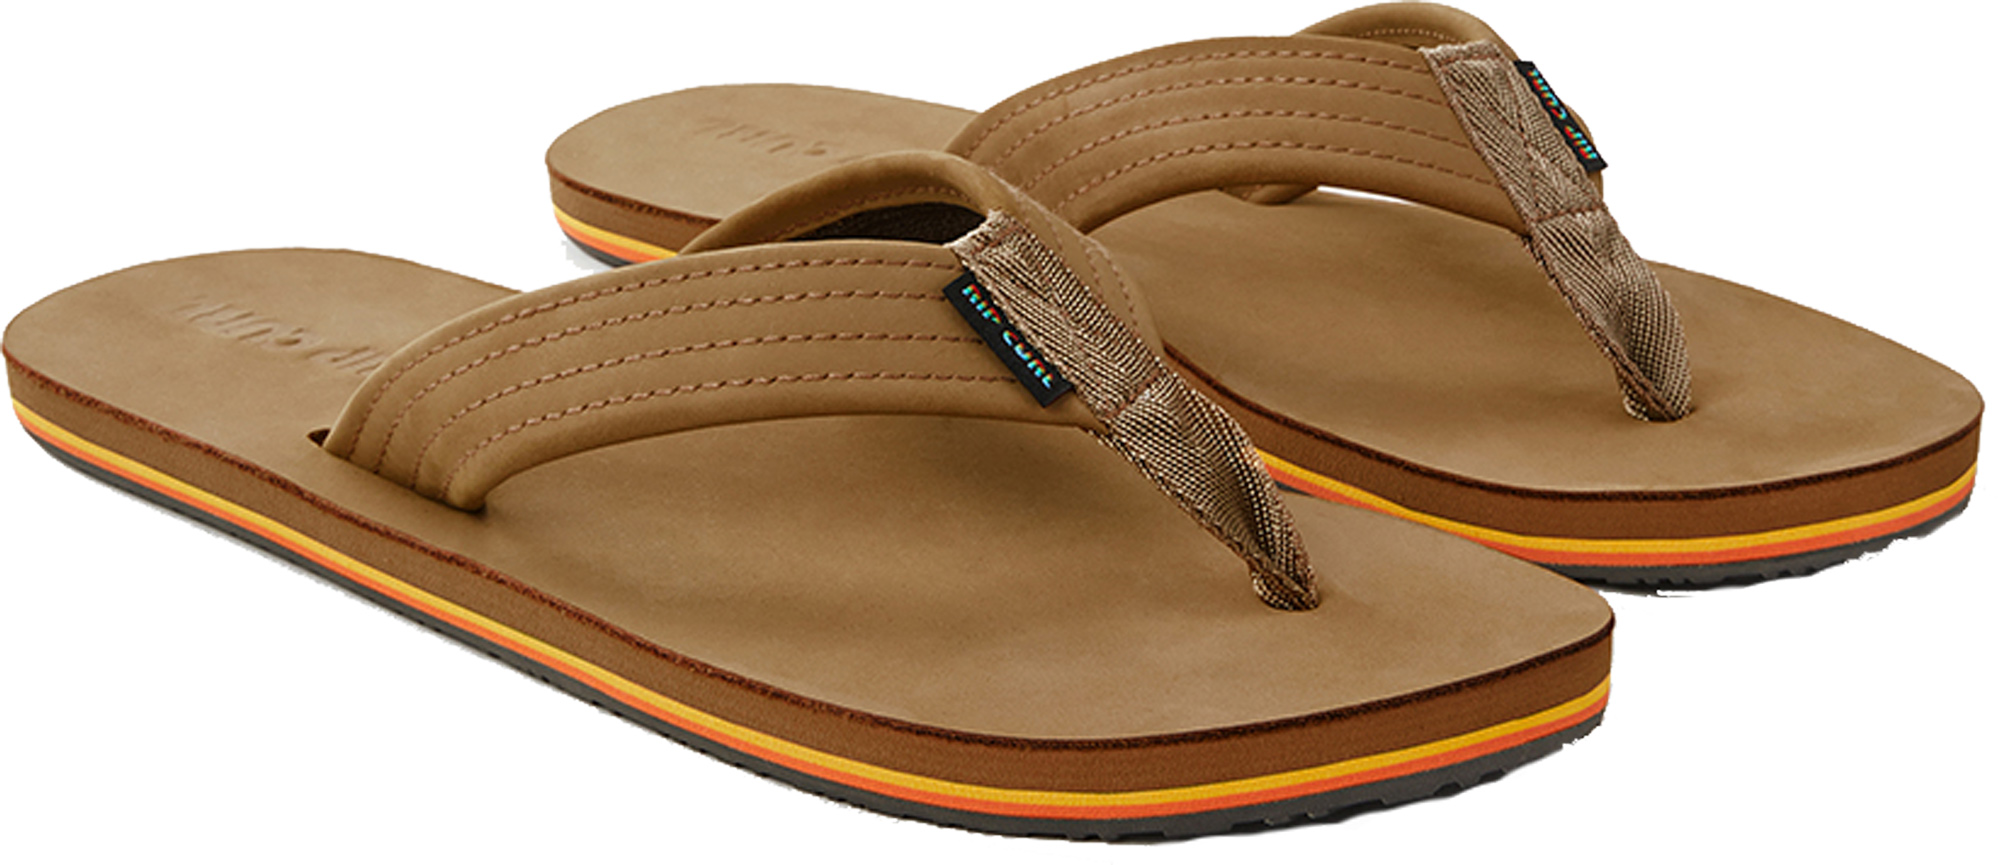 RIP CURL MENS FLIP FLOPS.NEW P-LOW FAUX LEATHER BROWN THONGS SANDALS 9S GE2 9 